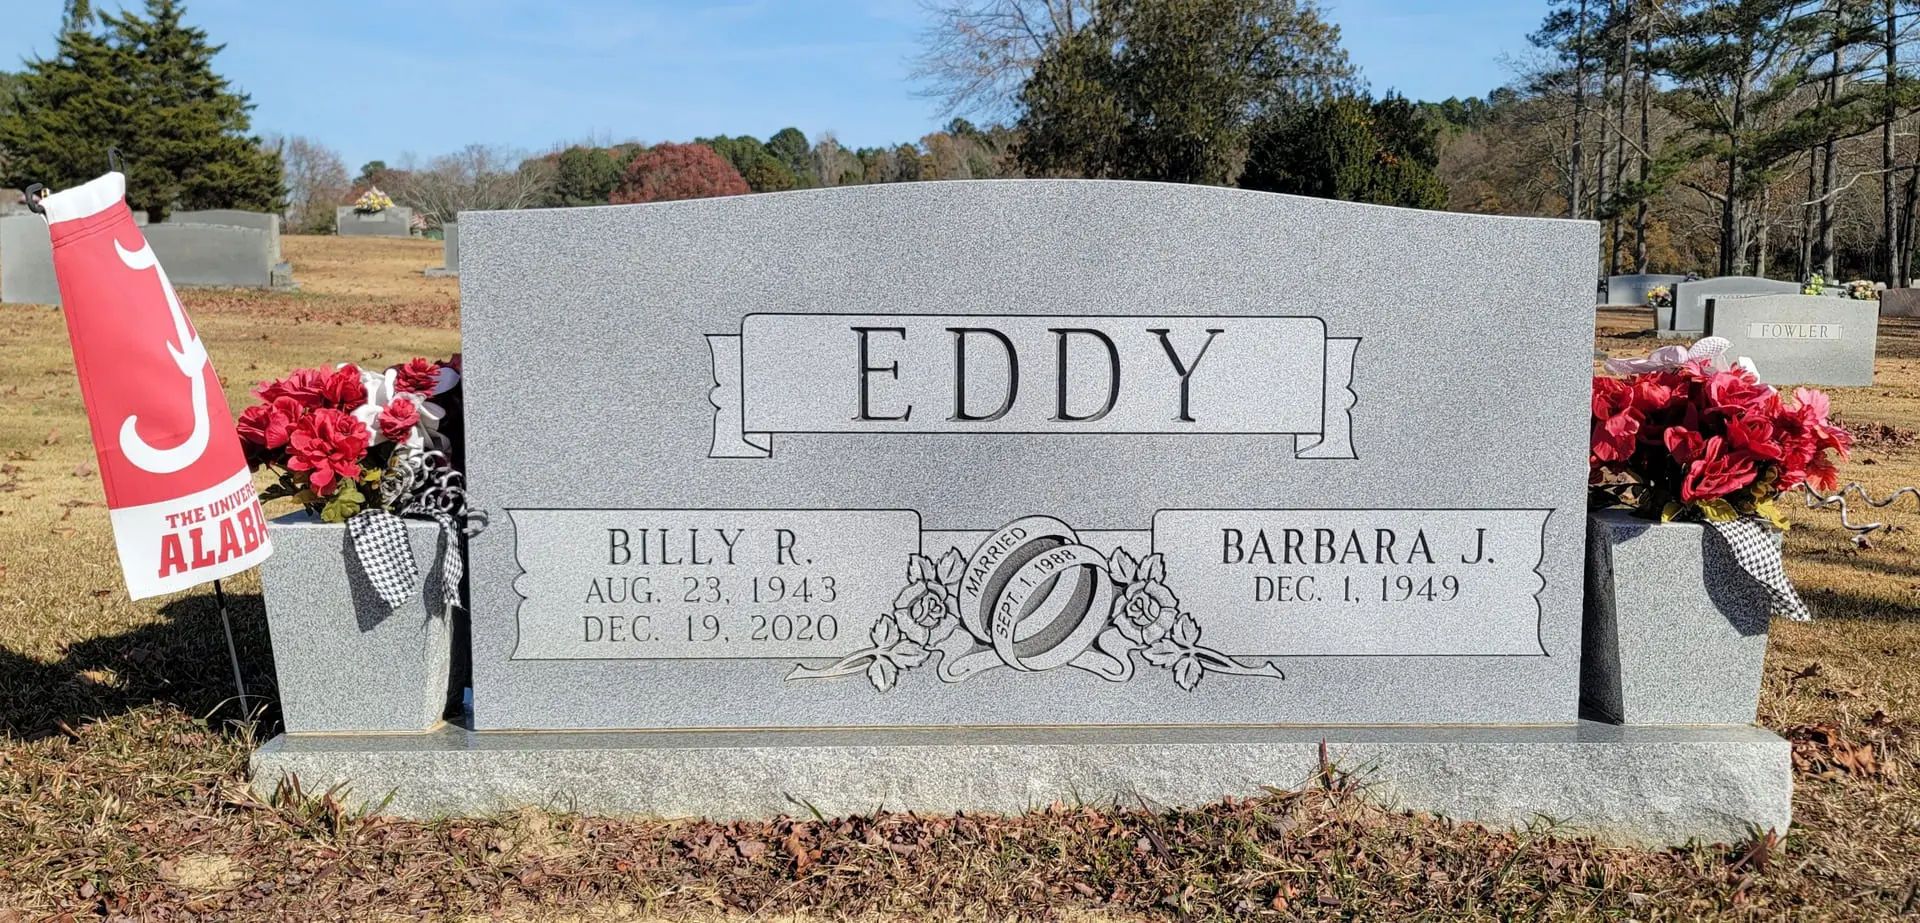 A memorial slab for Billy R. and Barbara J.